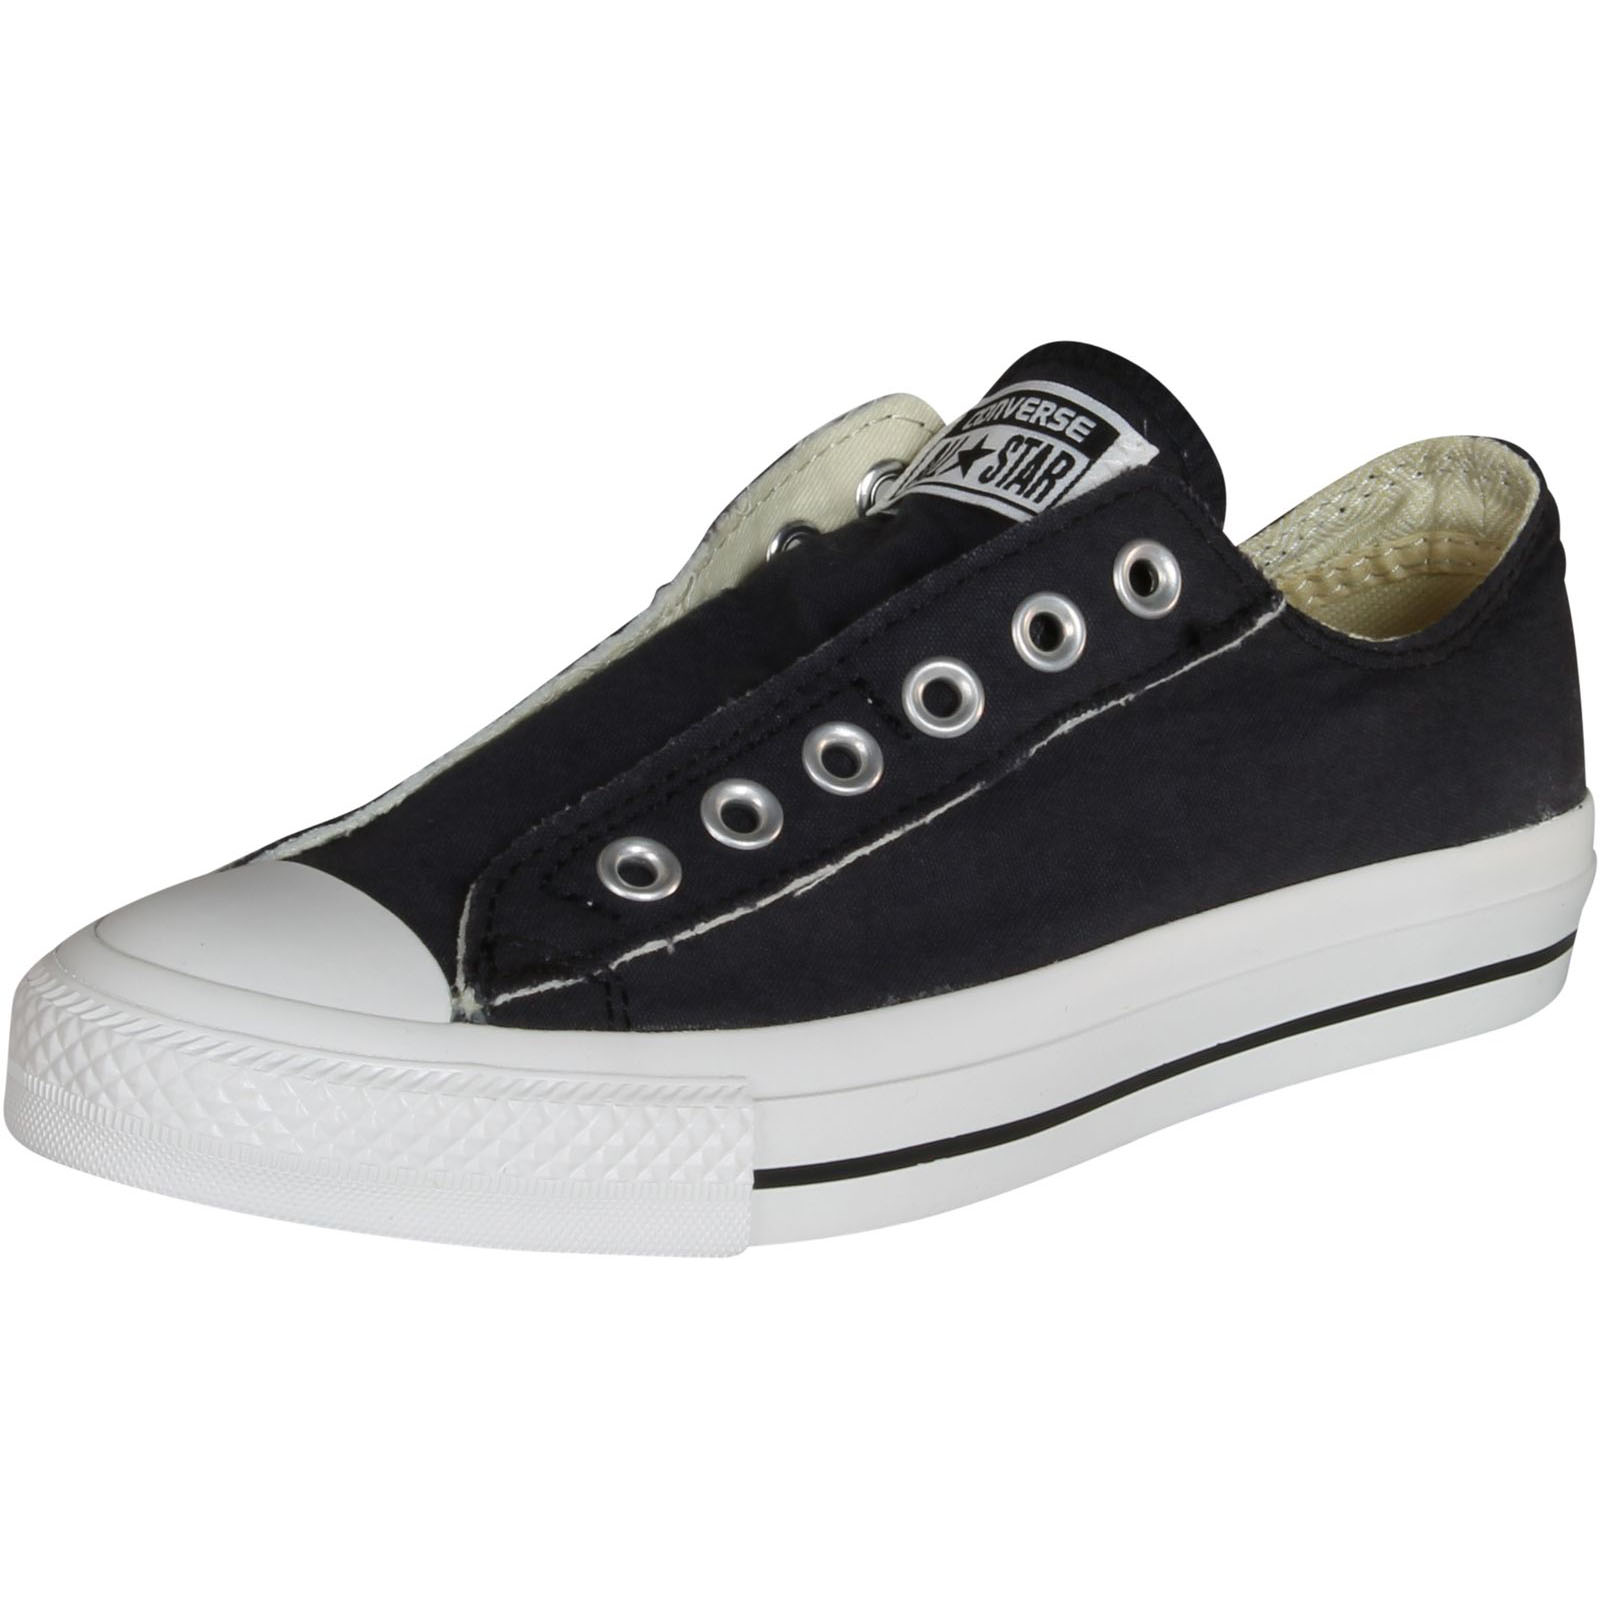 Mens Converse Chuck Taylor All Star Slip On OX Low Top Black White 1T3 - image 1 of 4